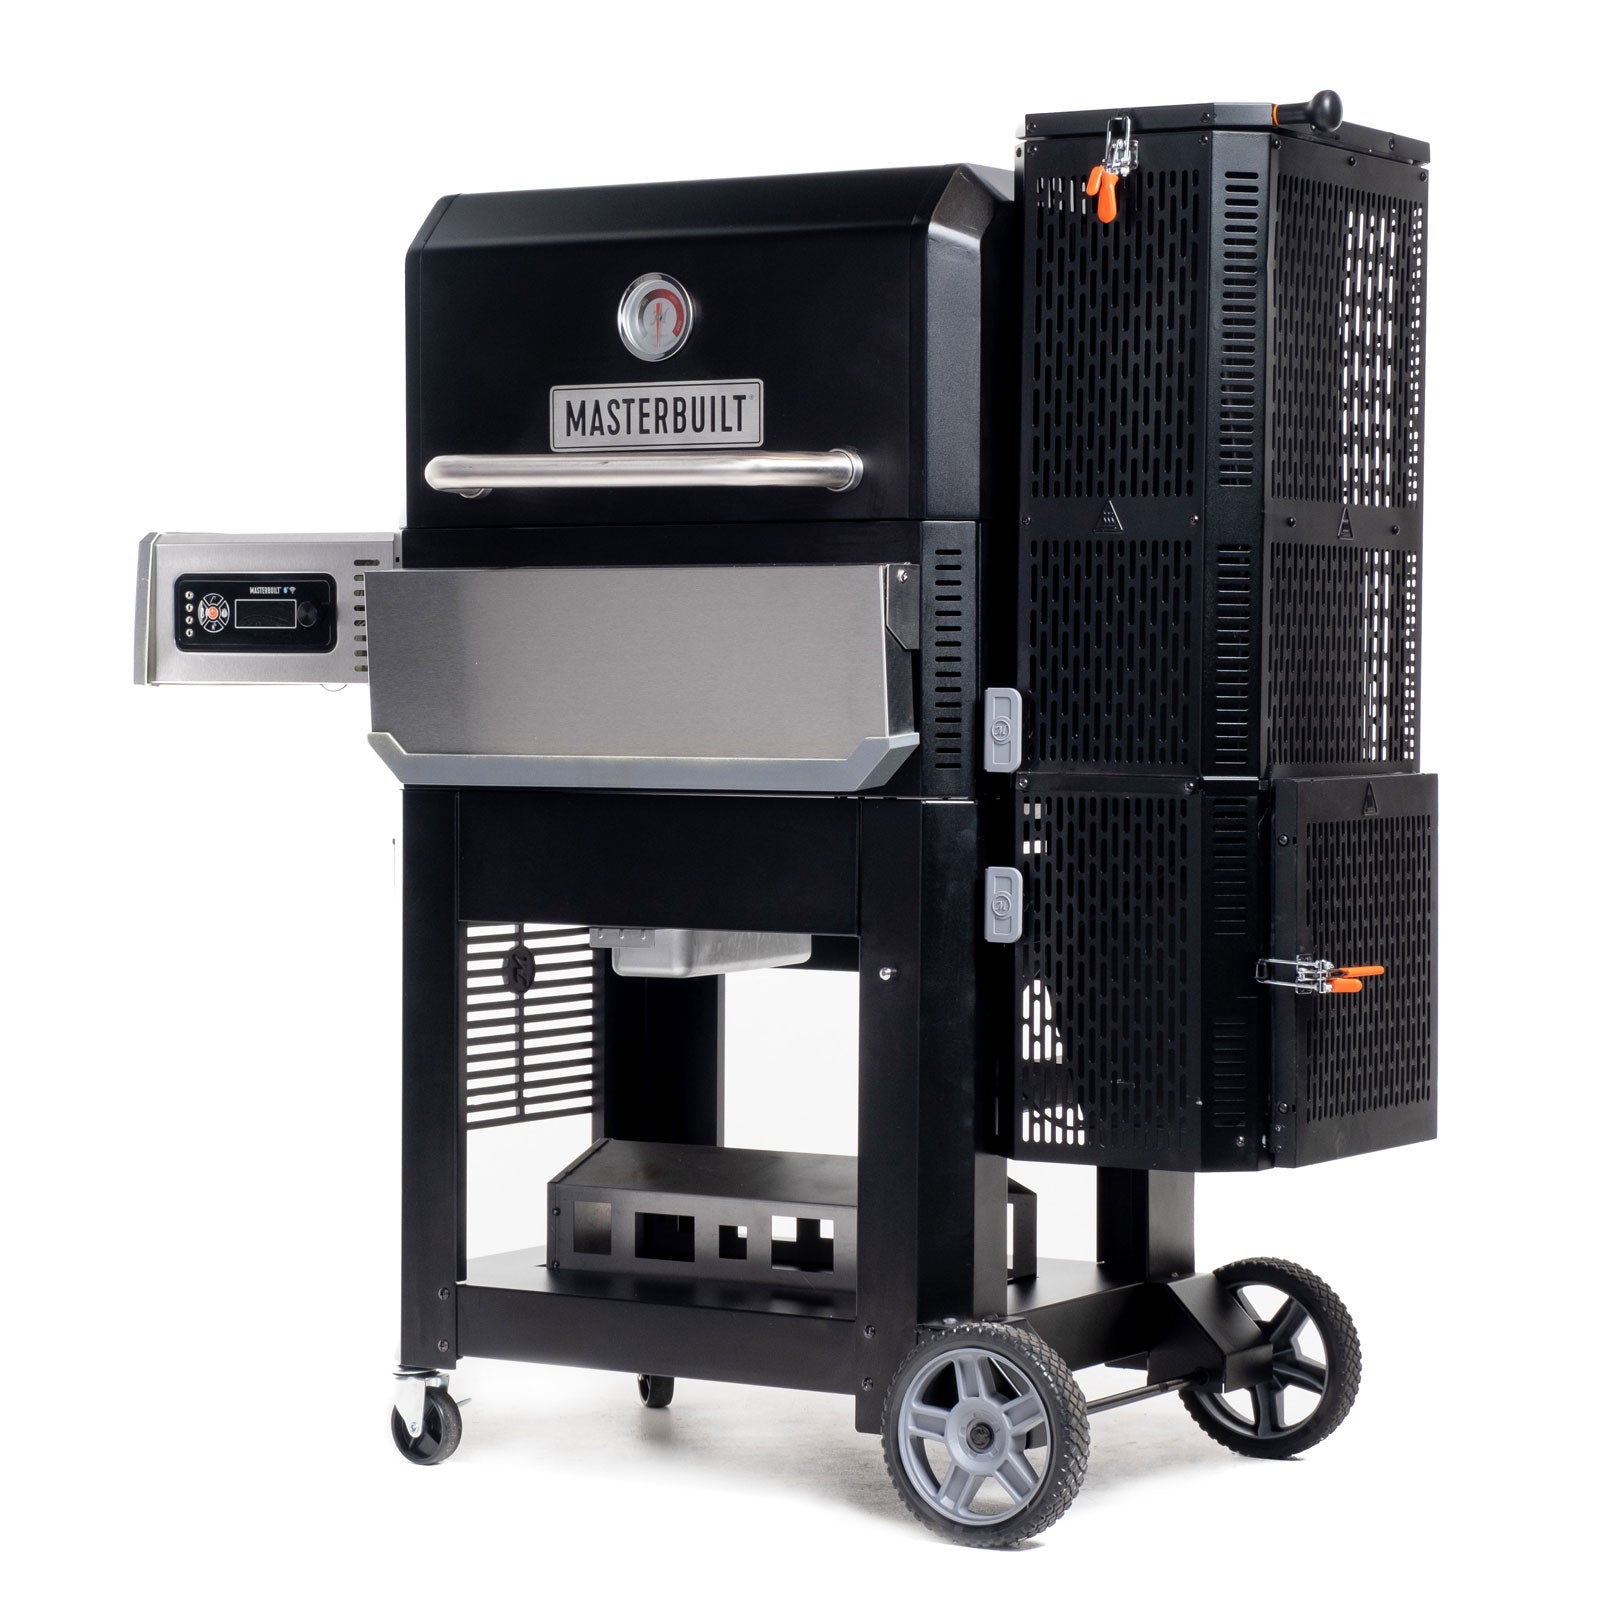 Masterbuilt Gravity Fed 800 Charcoal Grill and Smoker